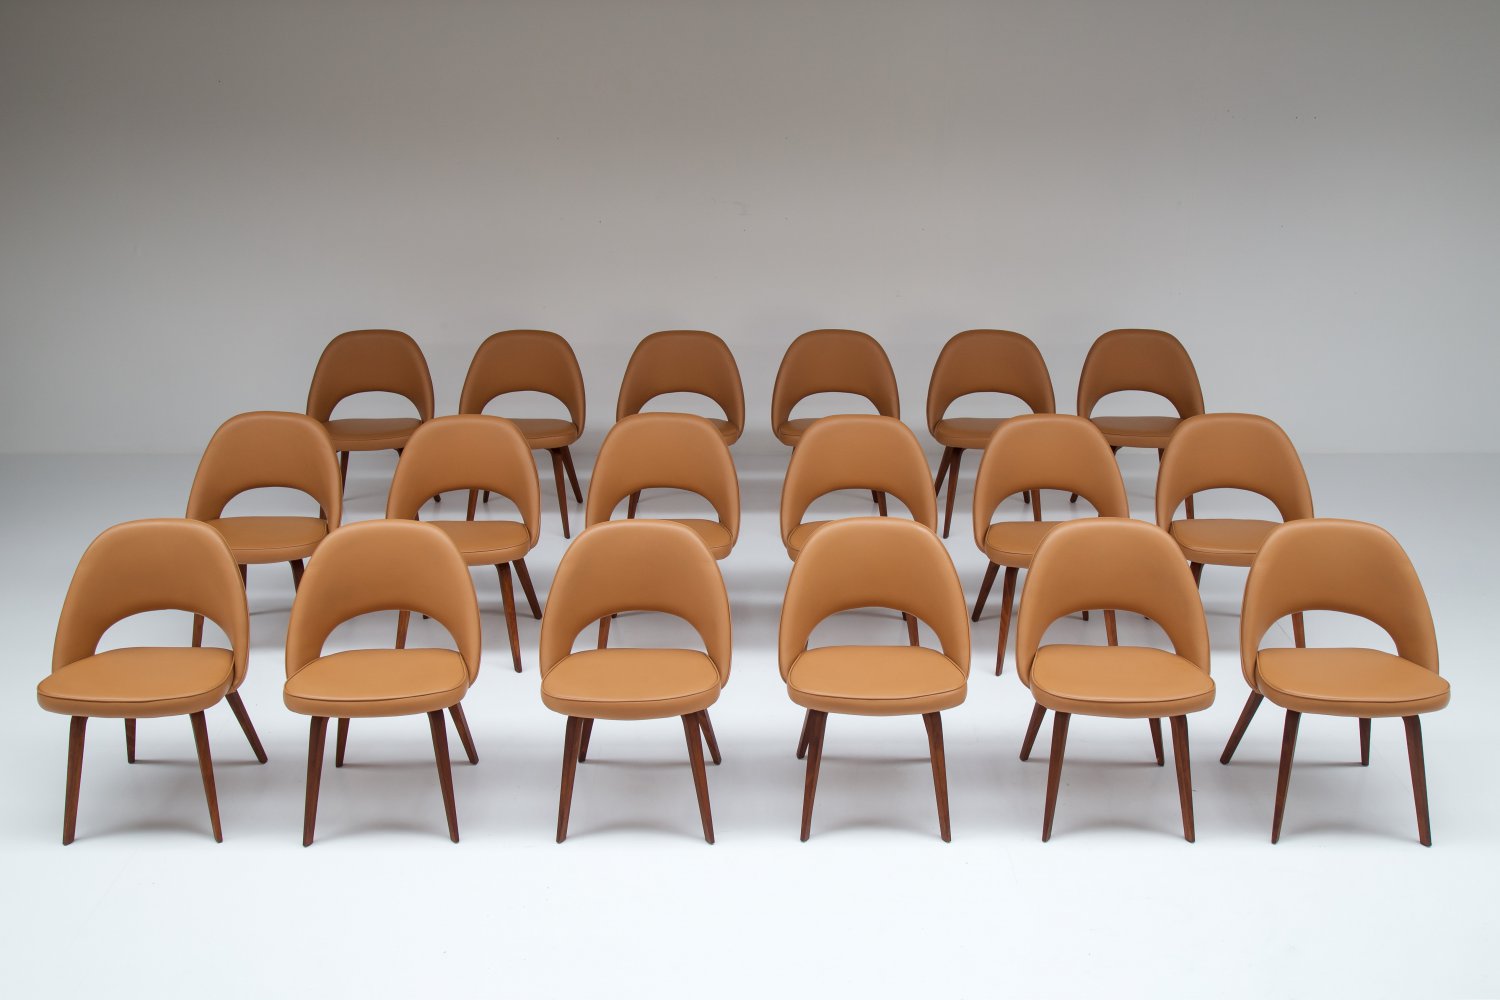 Large set of conference chairs by Eero Saarinen for Knoll